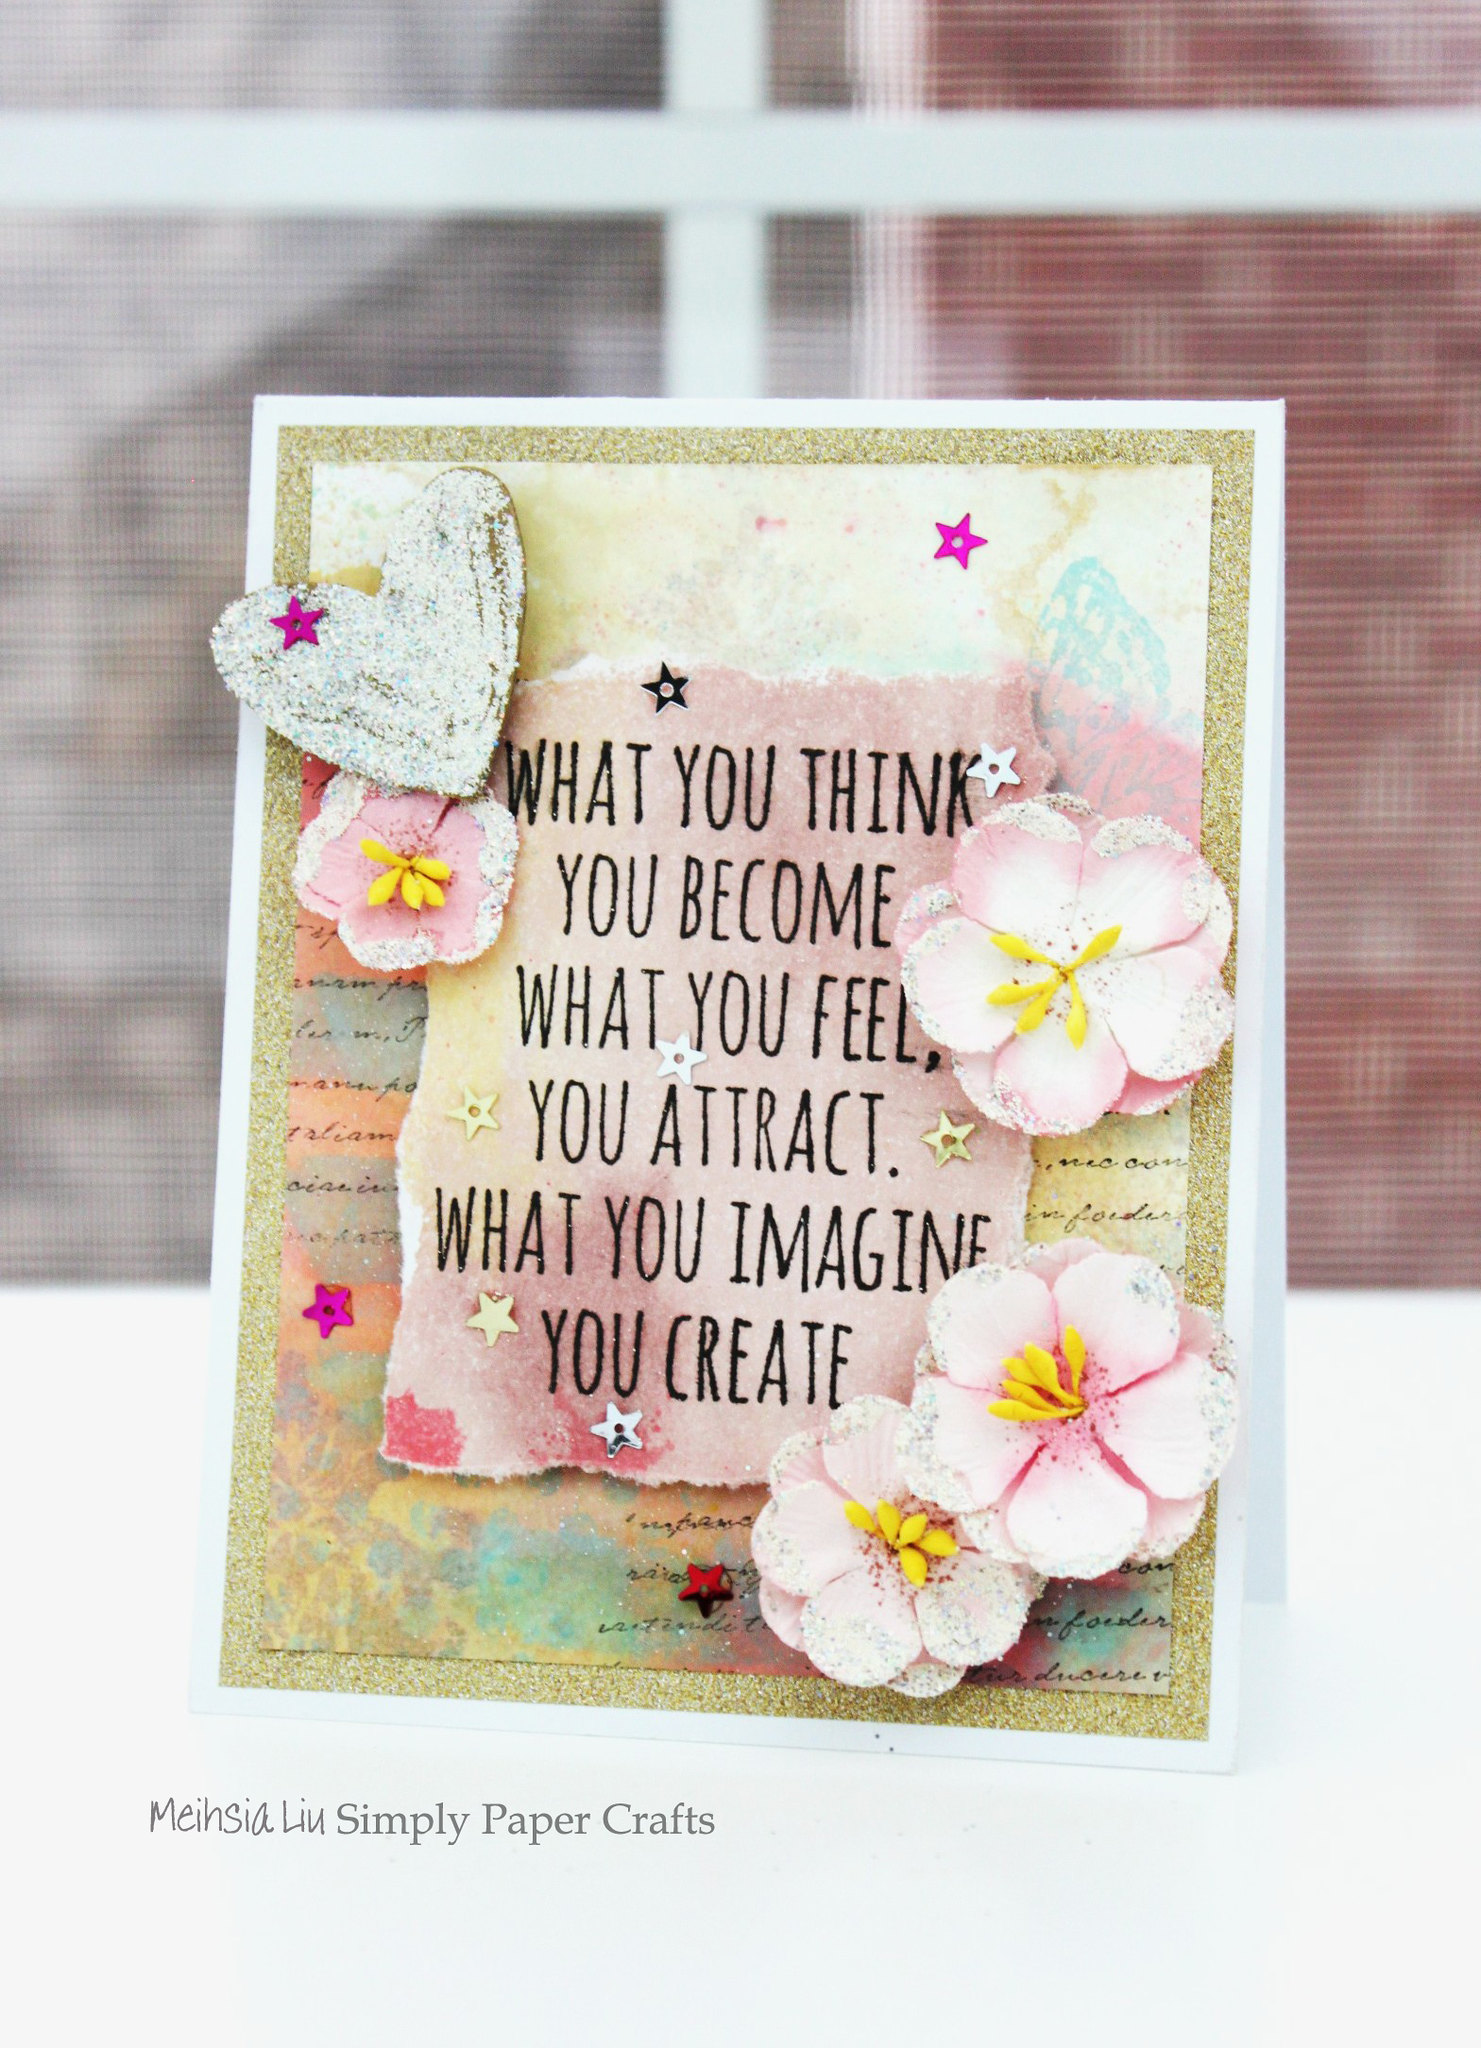 Meihsia Liu Simply Paper Crafts Mixed Media Card Sparkle Simon Says Stamp Tim Holtz Prima Flowers 1